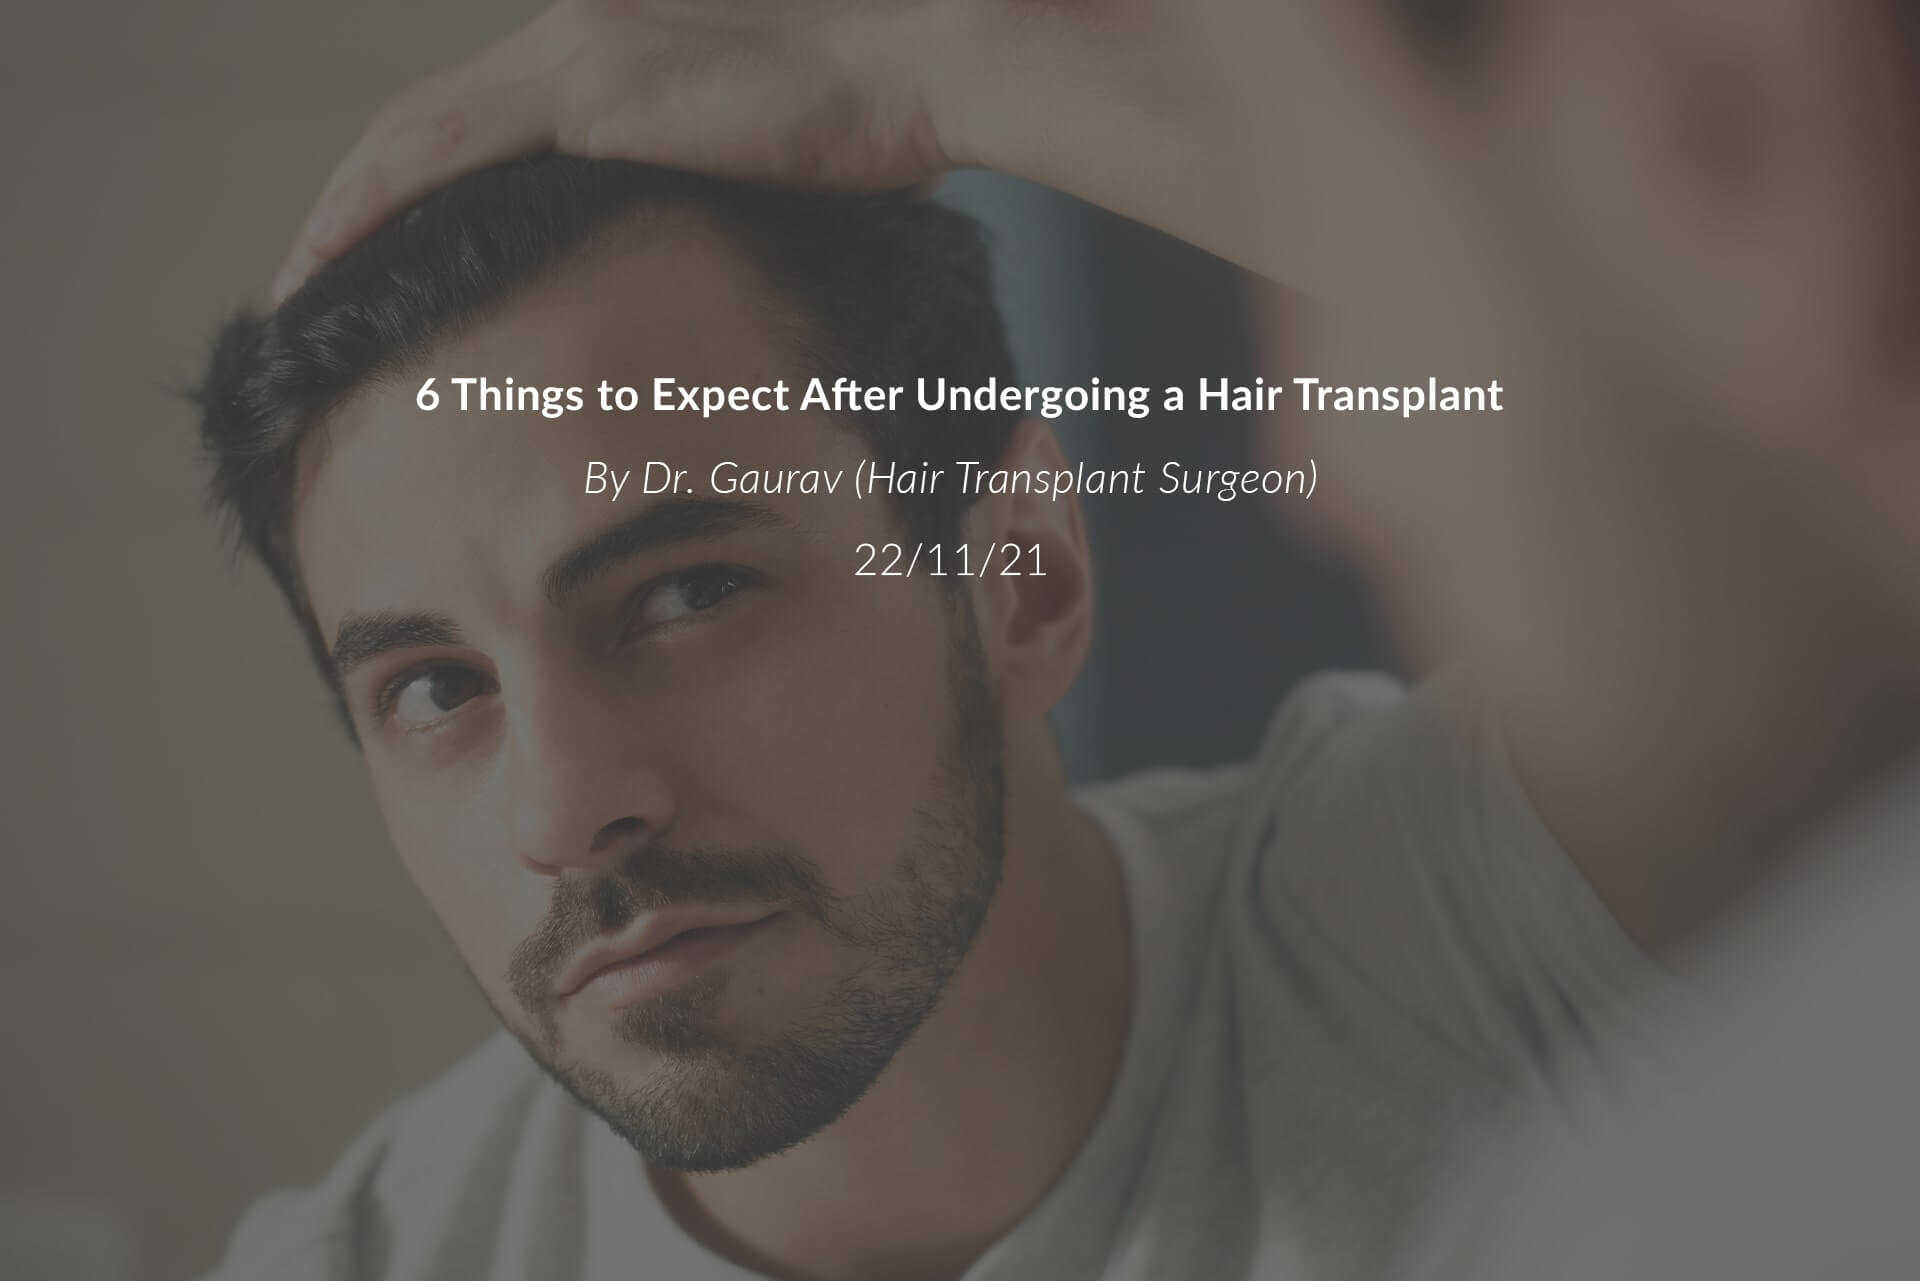 6 Things to Expect After Undergoing a Hair Transplant